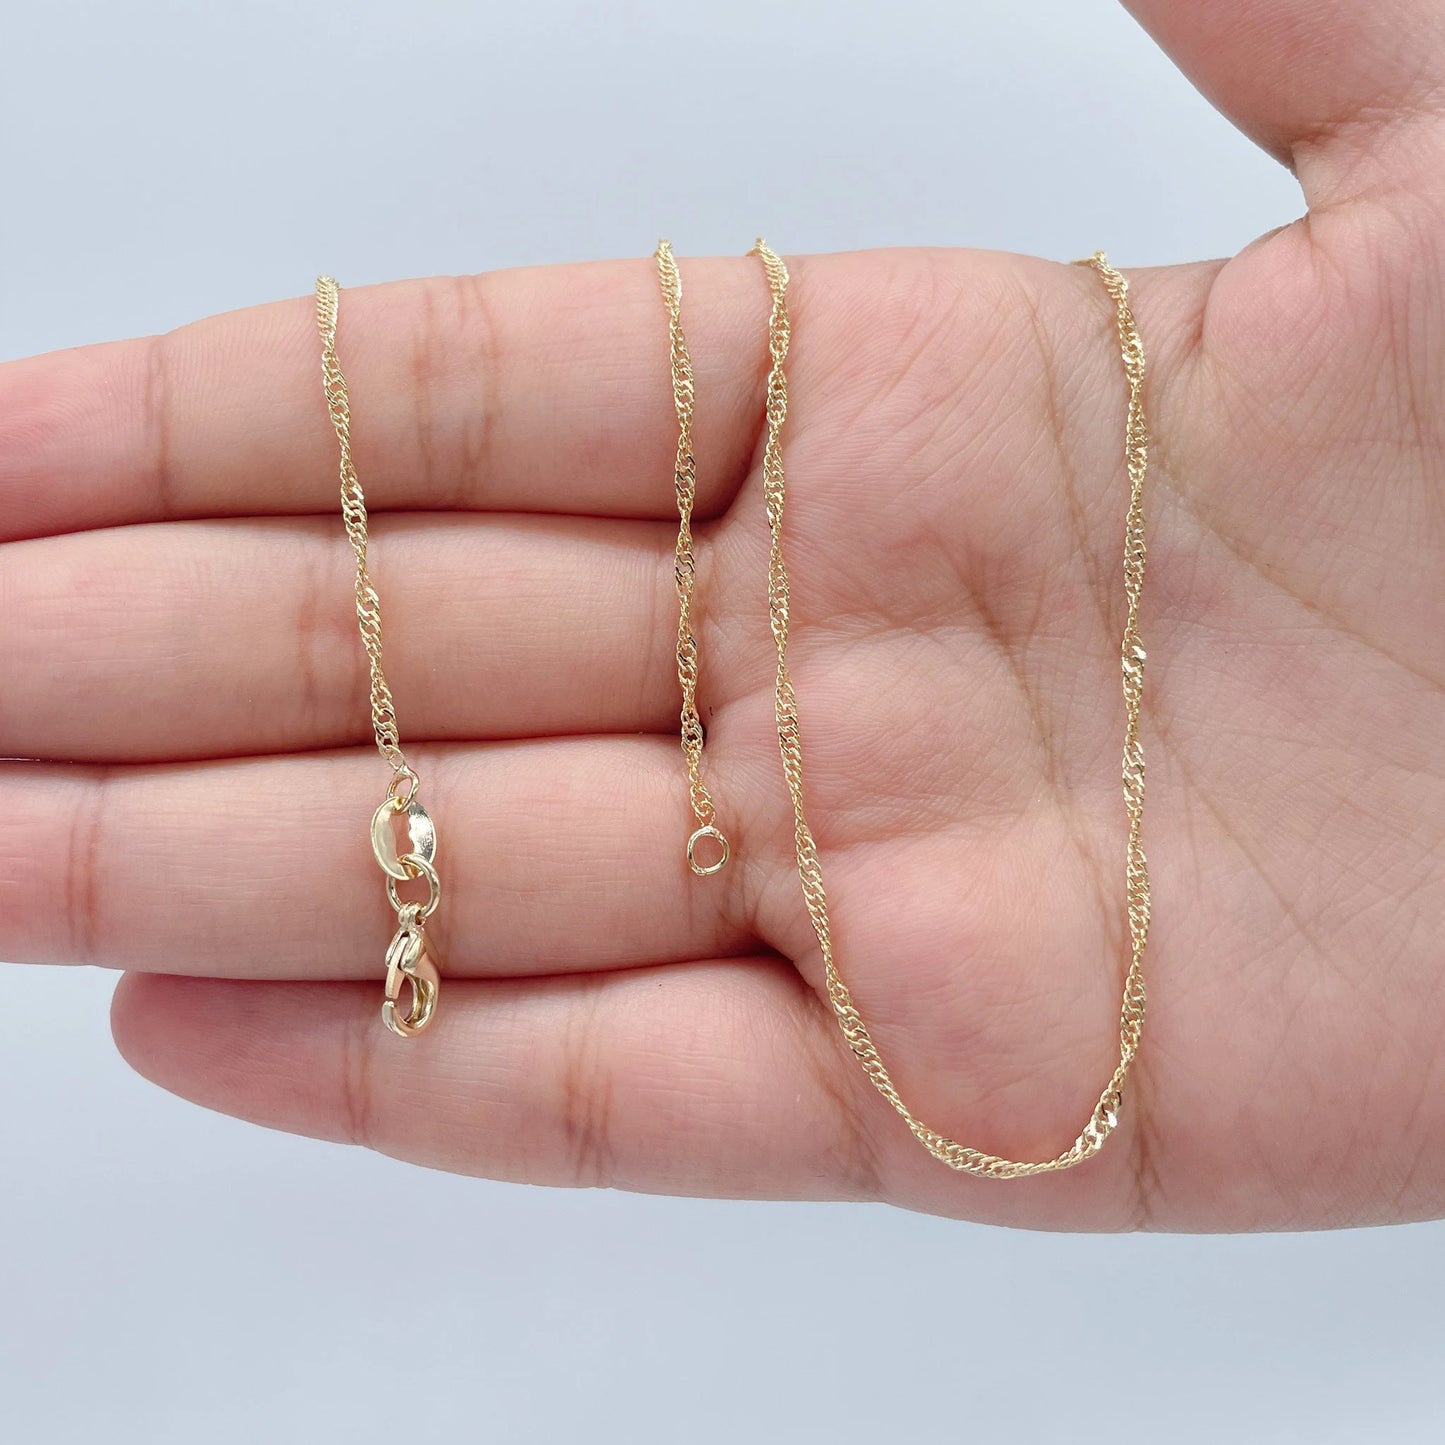 18k Gold Filled 1mm Dainty Singapore Chain Necklace   Supplies  Creative Styling and Design Layers